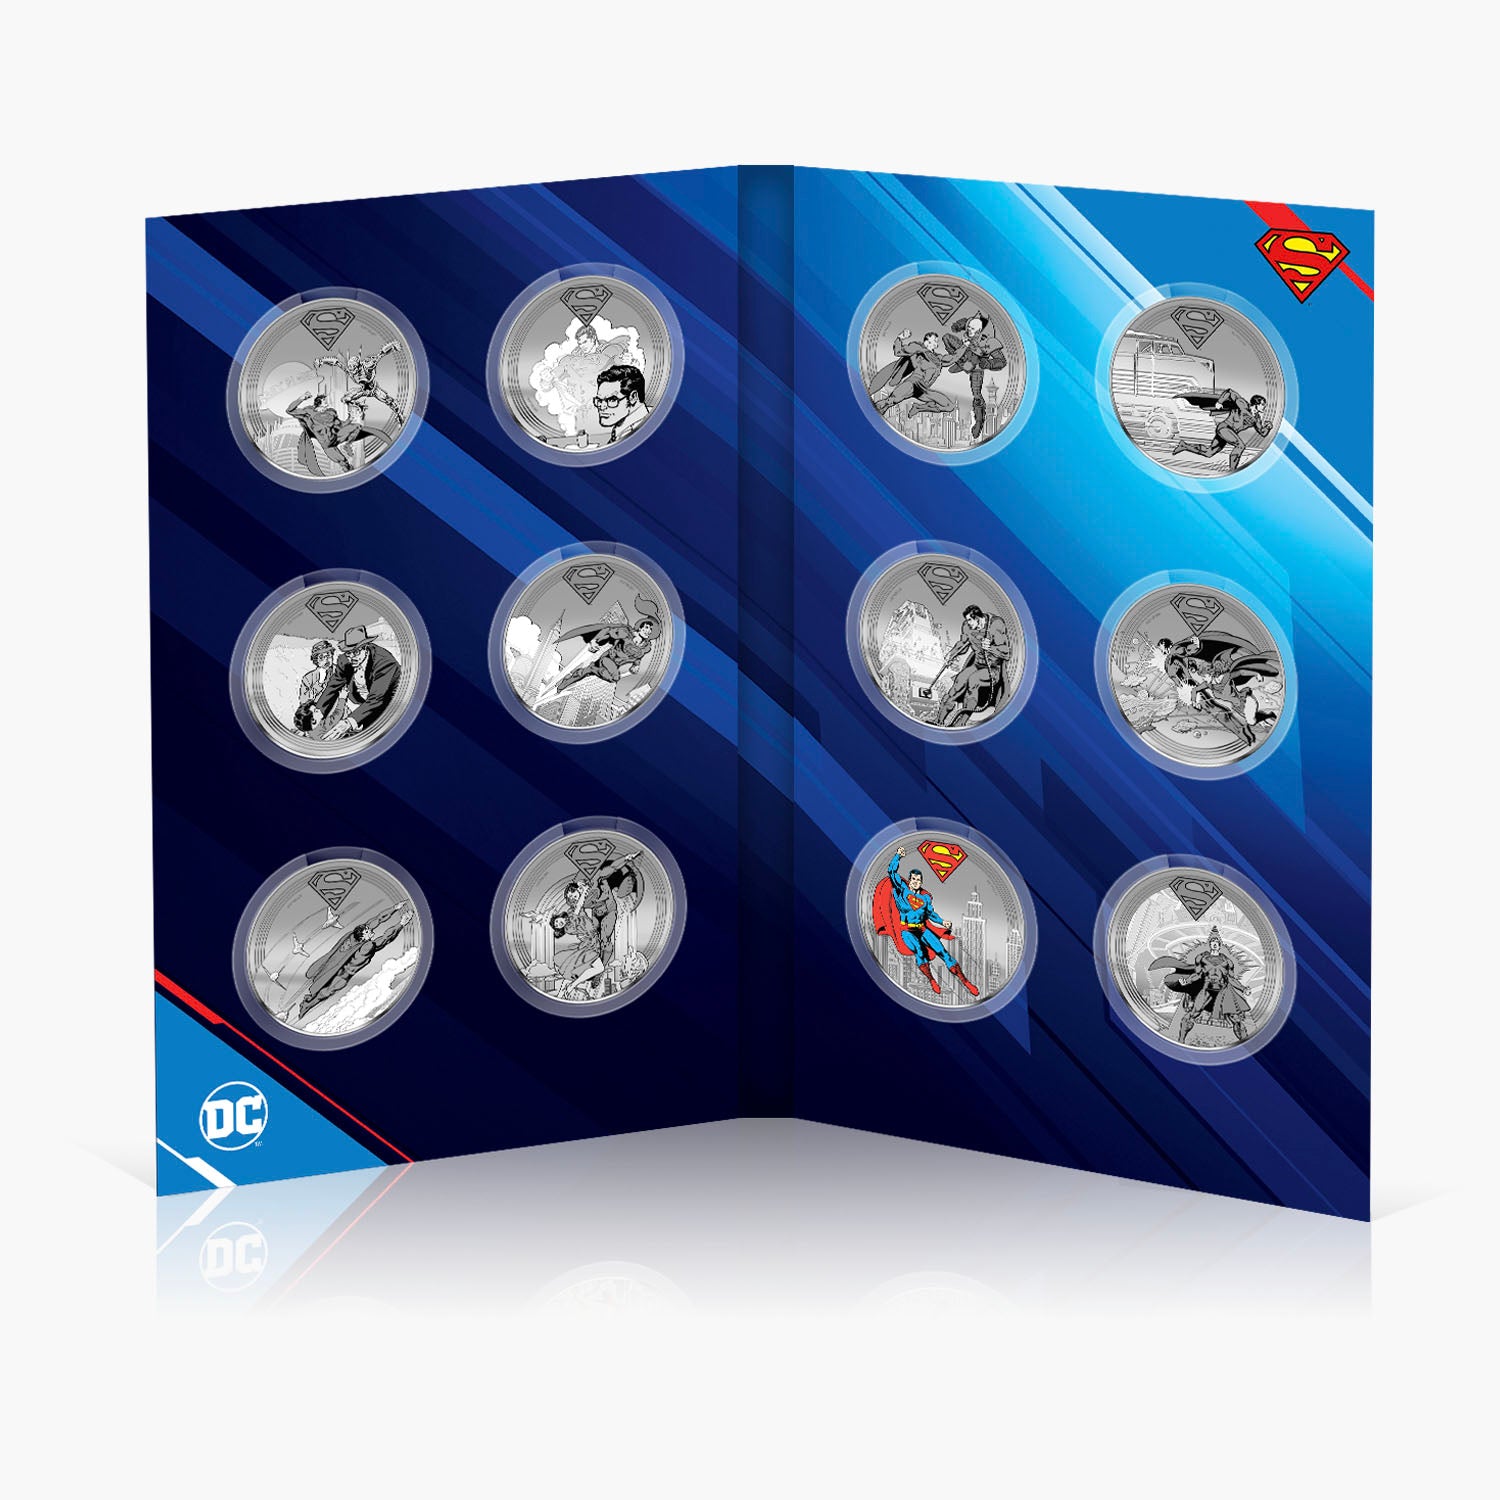 The Official DC Comics .999 Silver Plated Proof Superman Collection